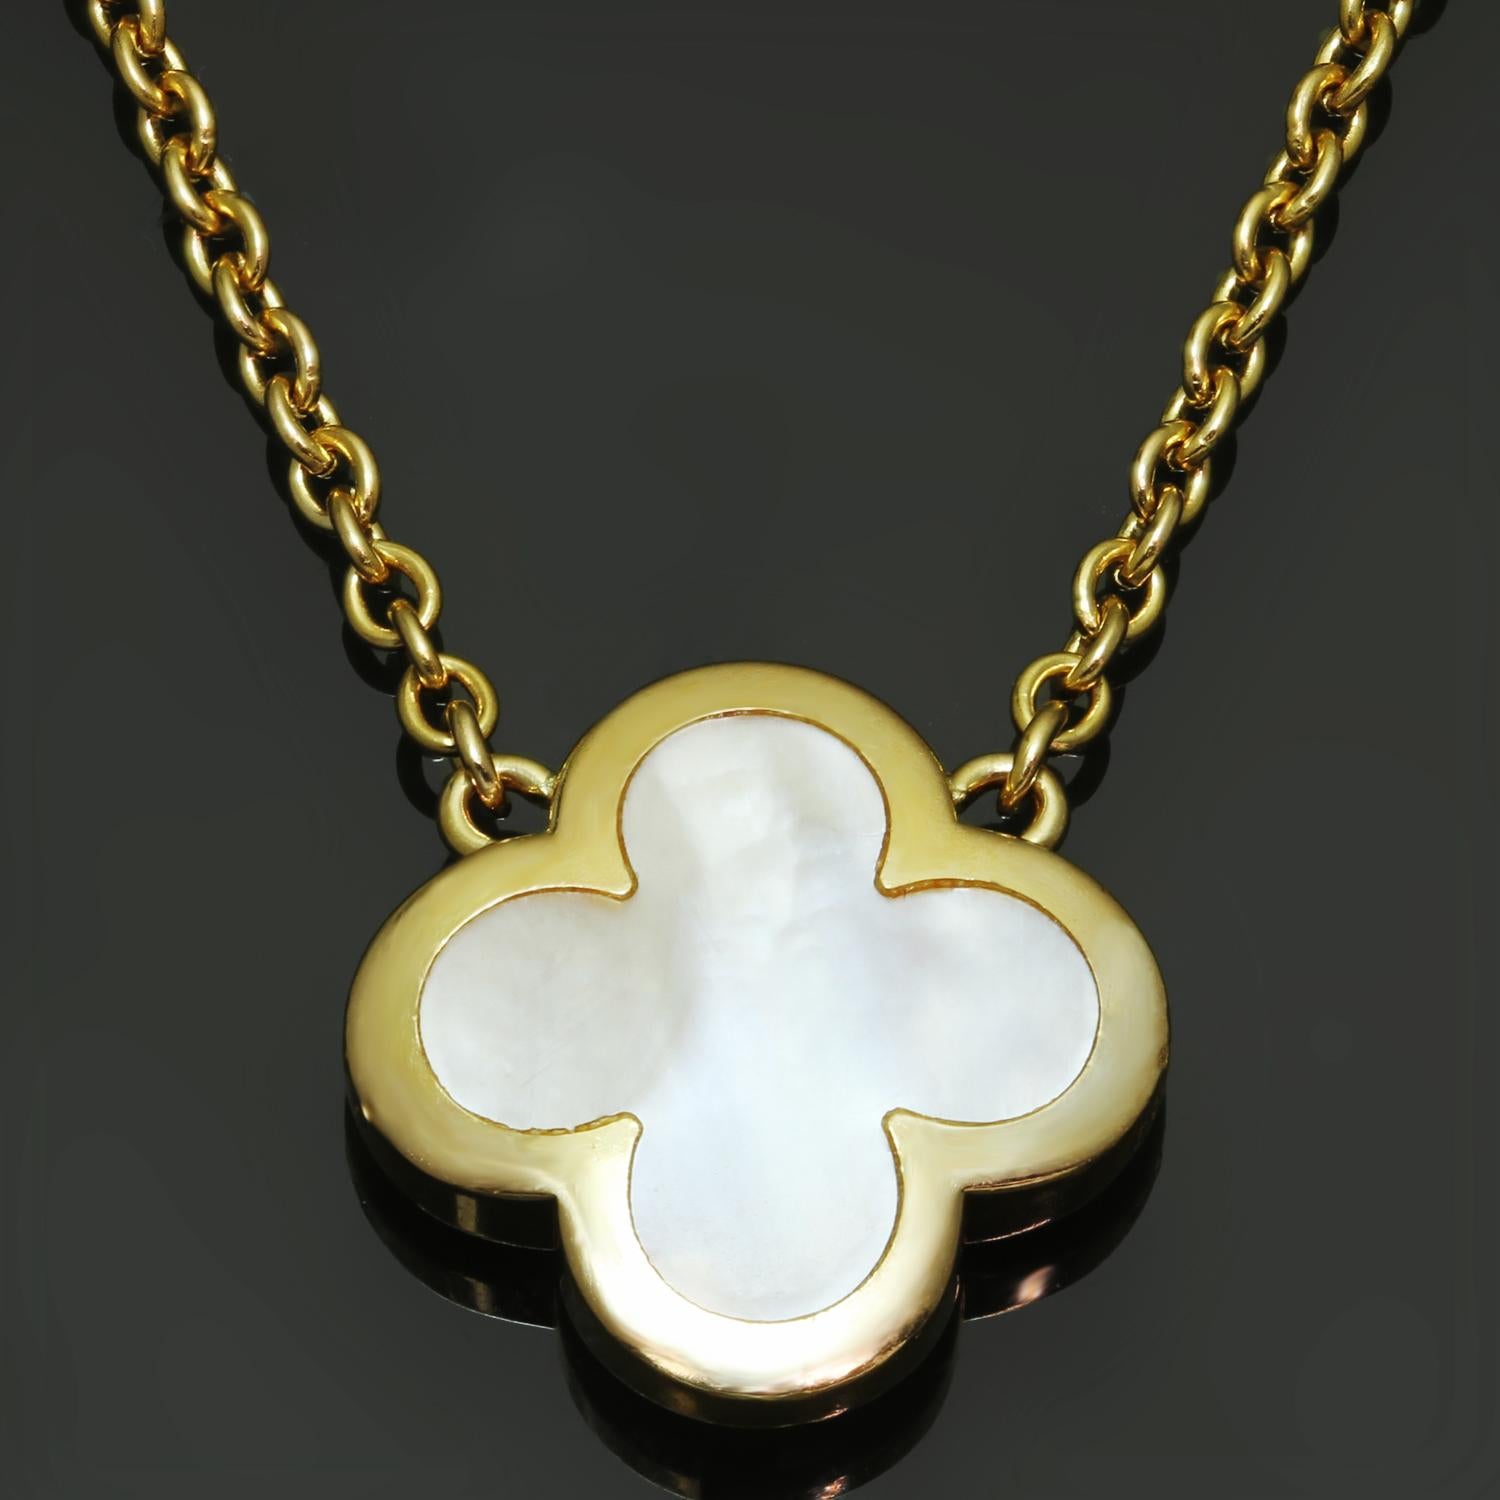 This elegant Van Cleef & Arpels pendant necklace from the pure Alhambra collection features the lucky clover design crafted in 18k yellow gold and set with white mother-of-pearl. Made in France circa 2010s. Excellent condition. Comes with VCA pouch.